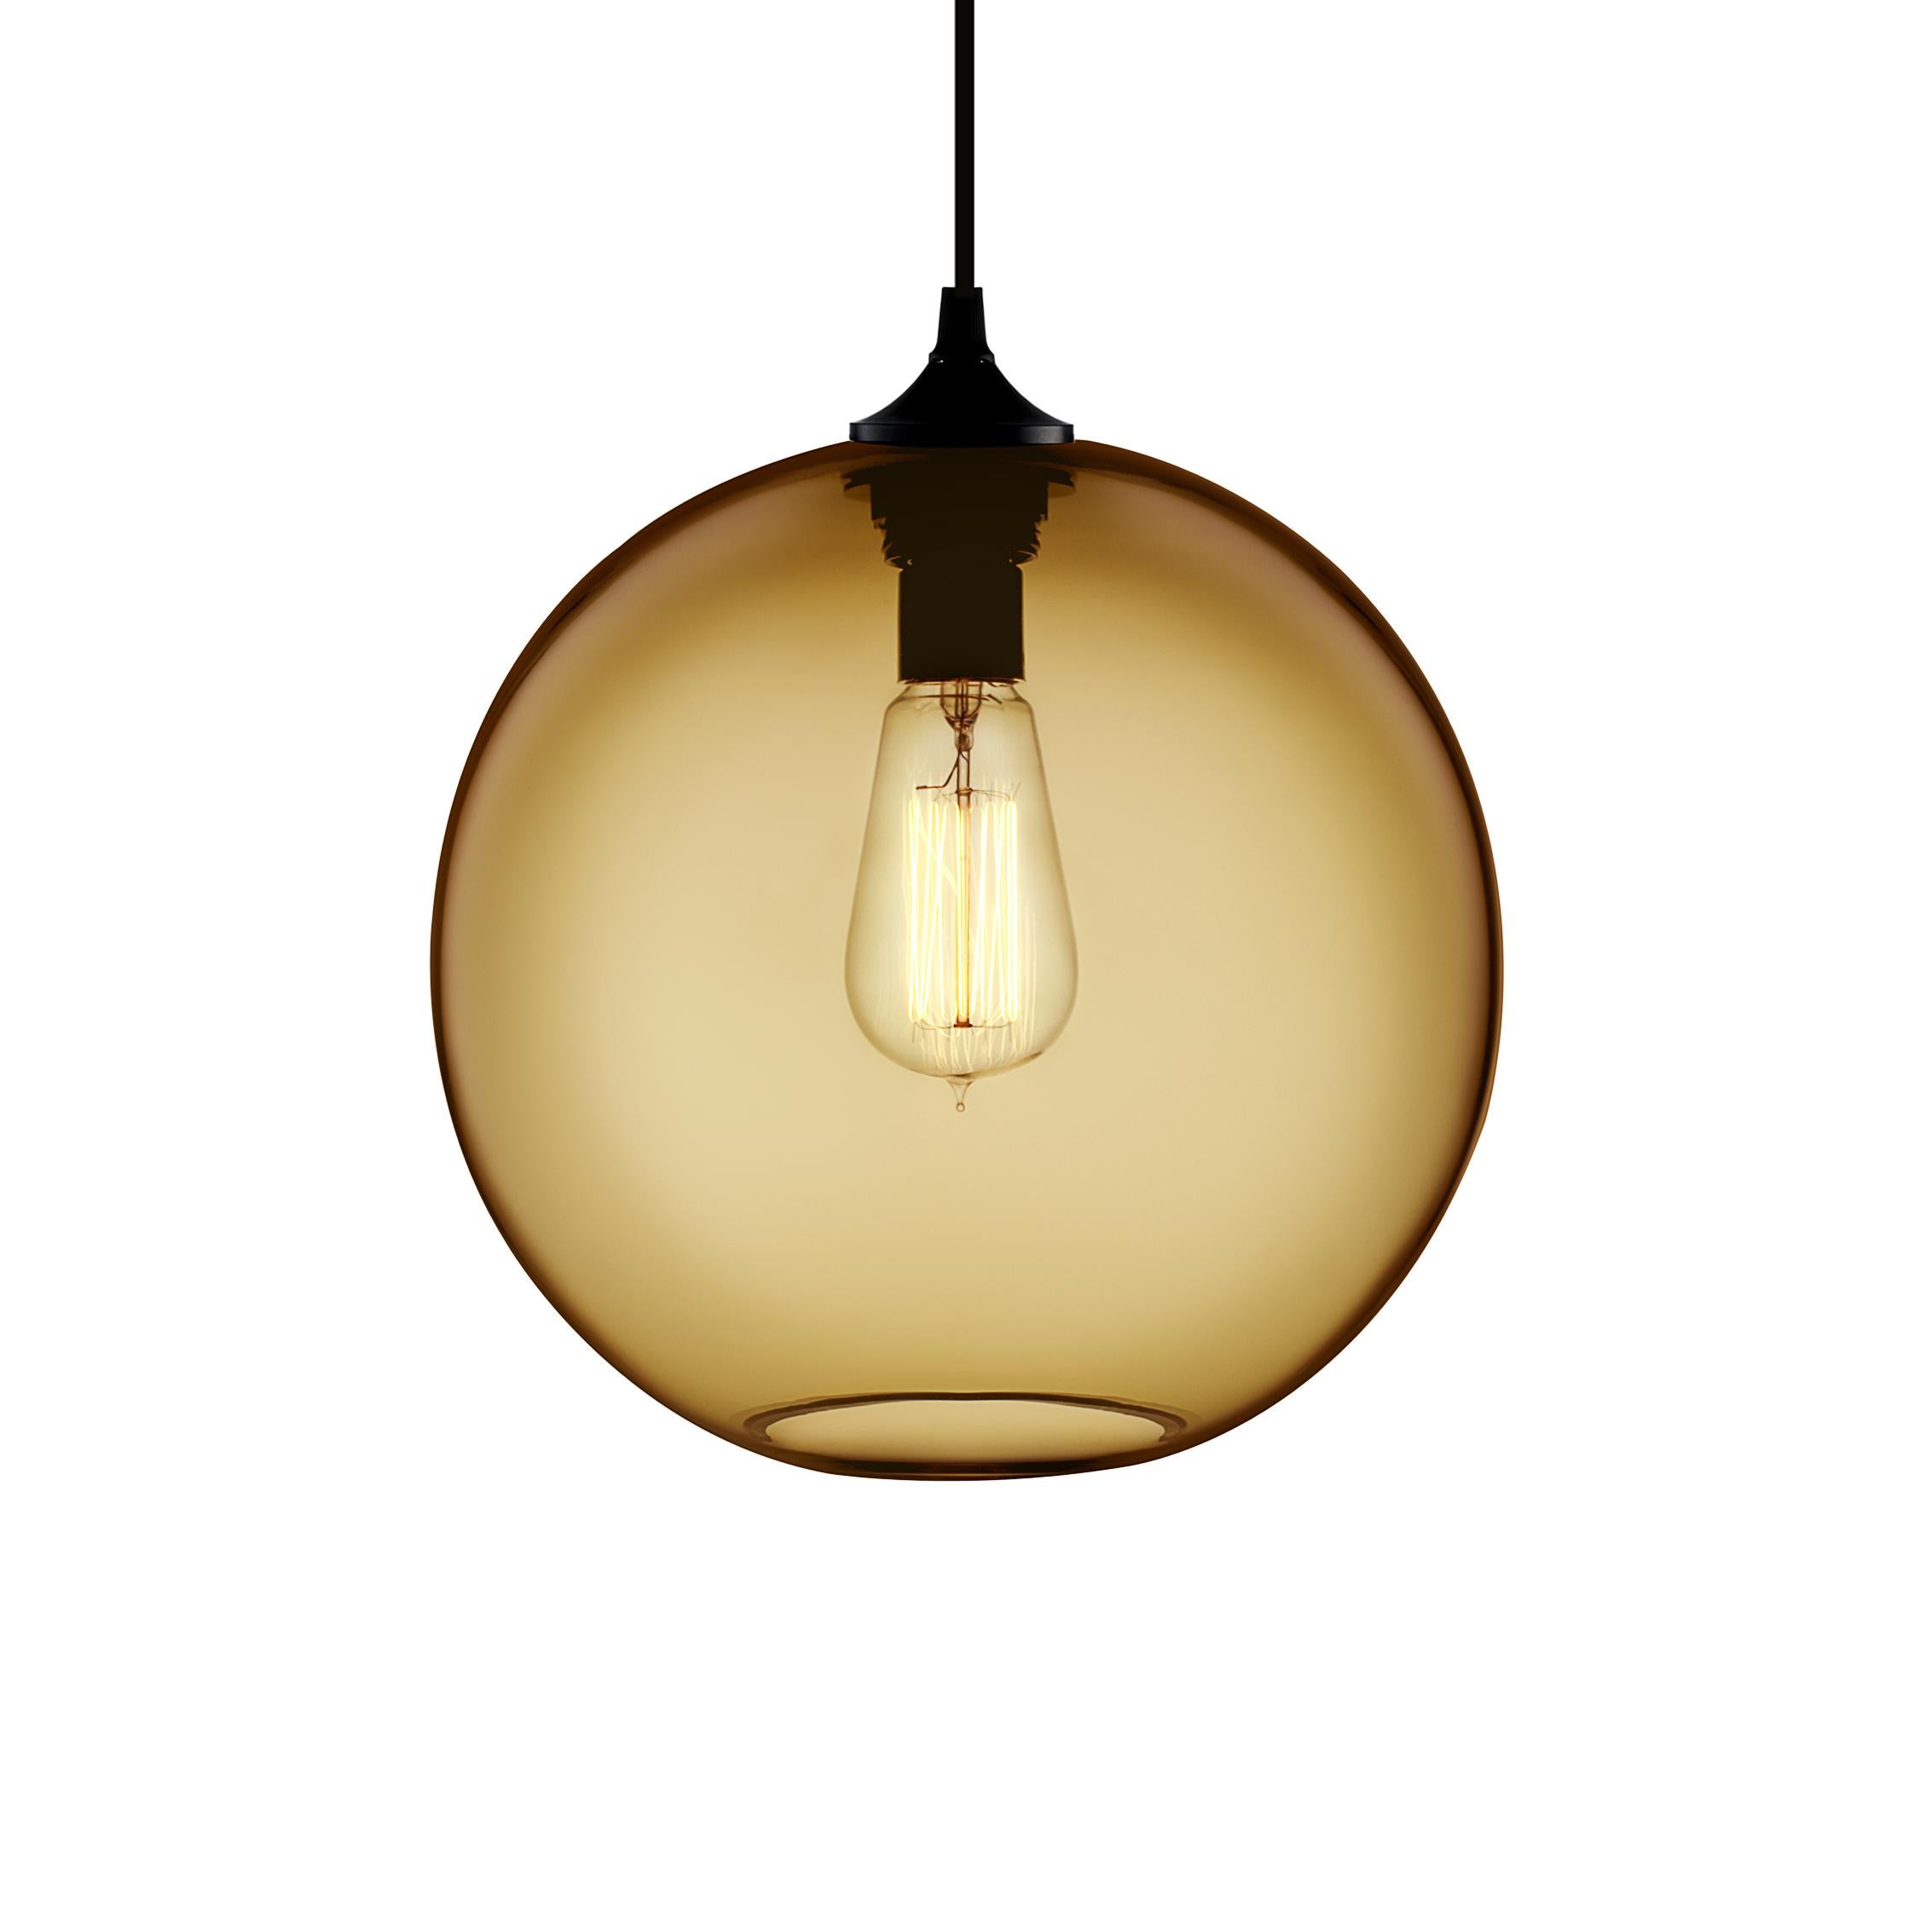 American Solitaire Amber Handblown Modern Glass Pendant Light, Made in the USA For Sale